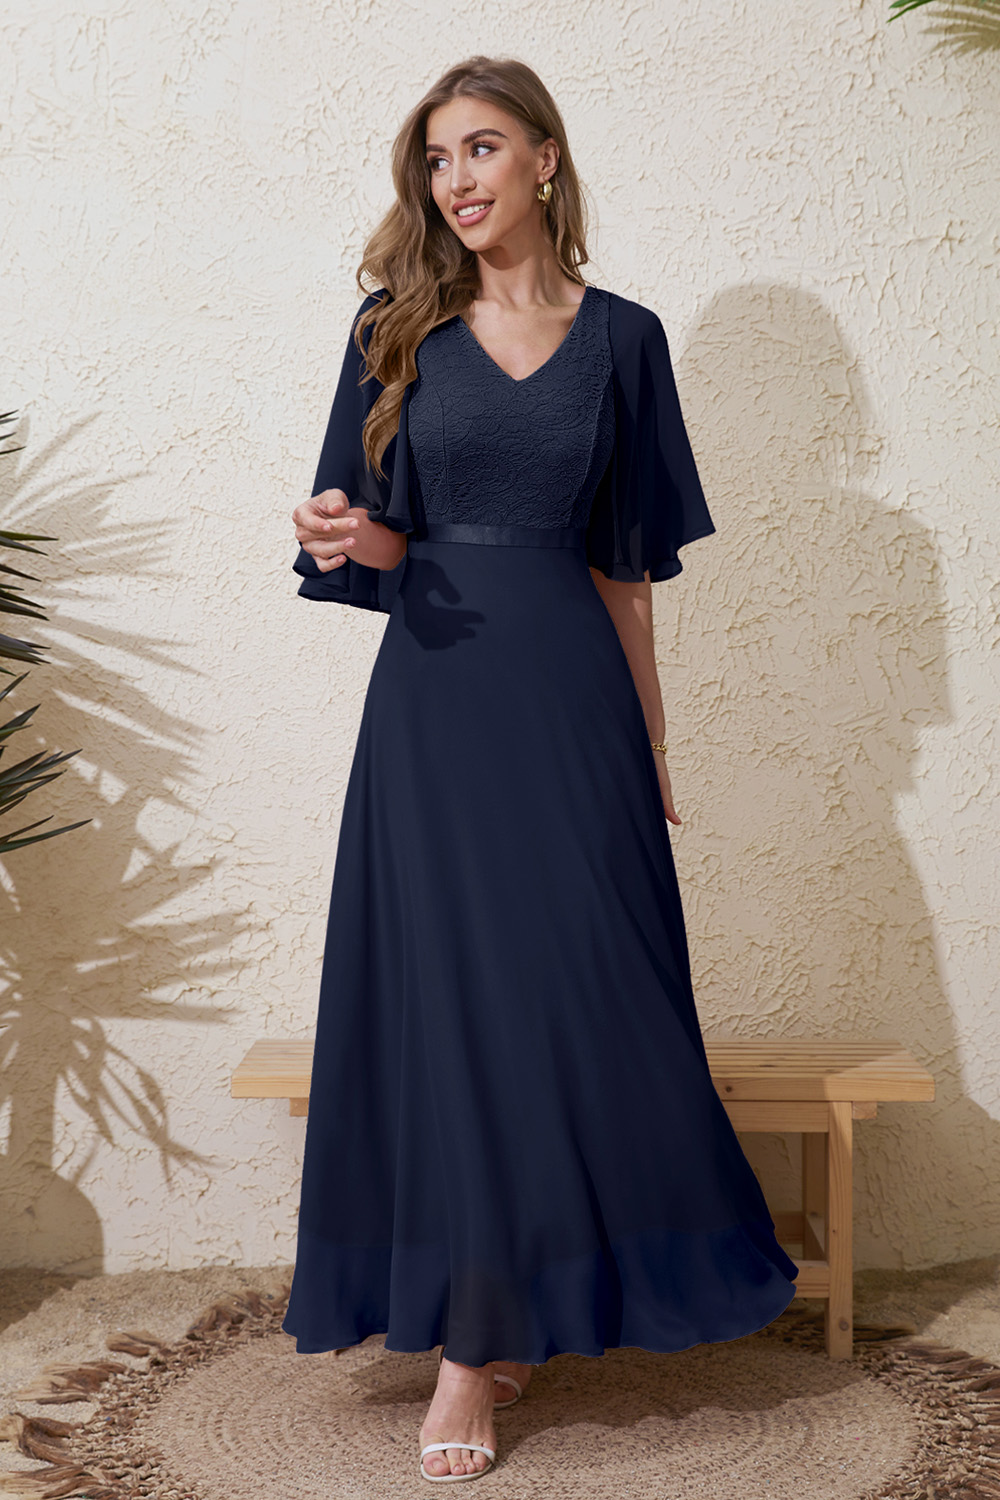 Elegant Navy V-Neck Chiffon Evening Gown for Formal Occasions